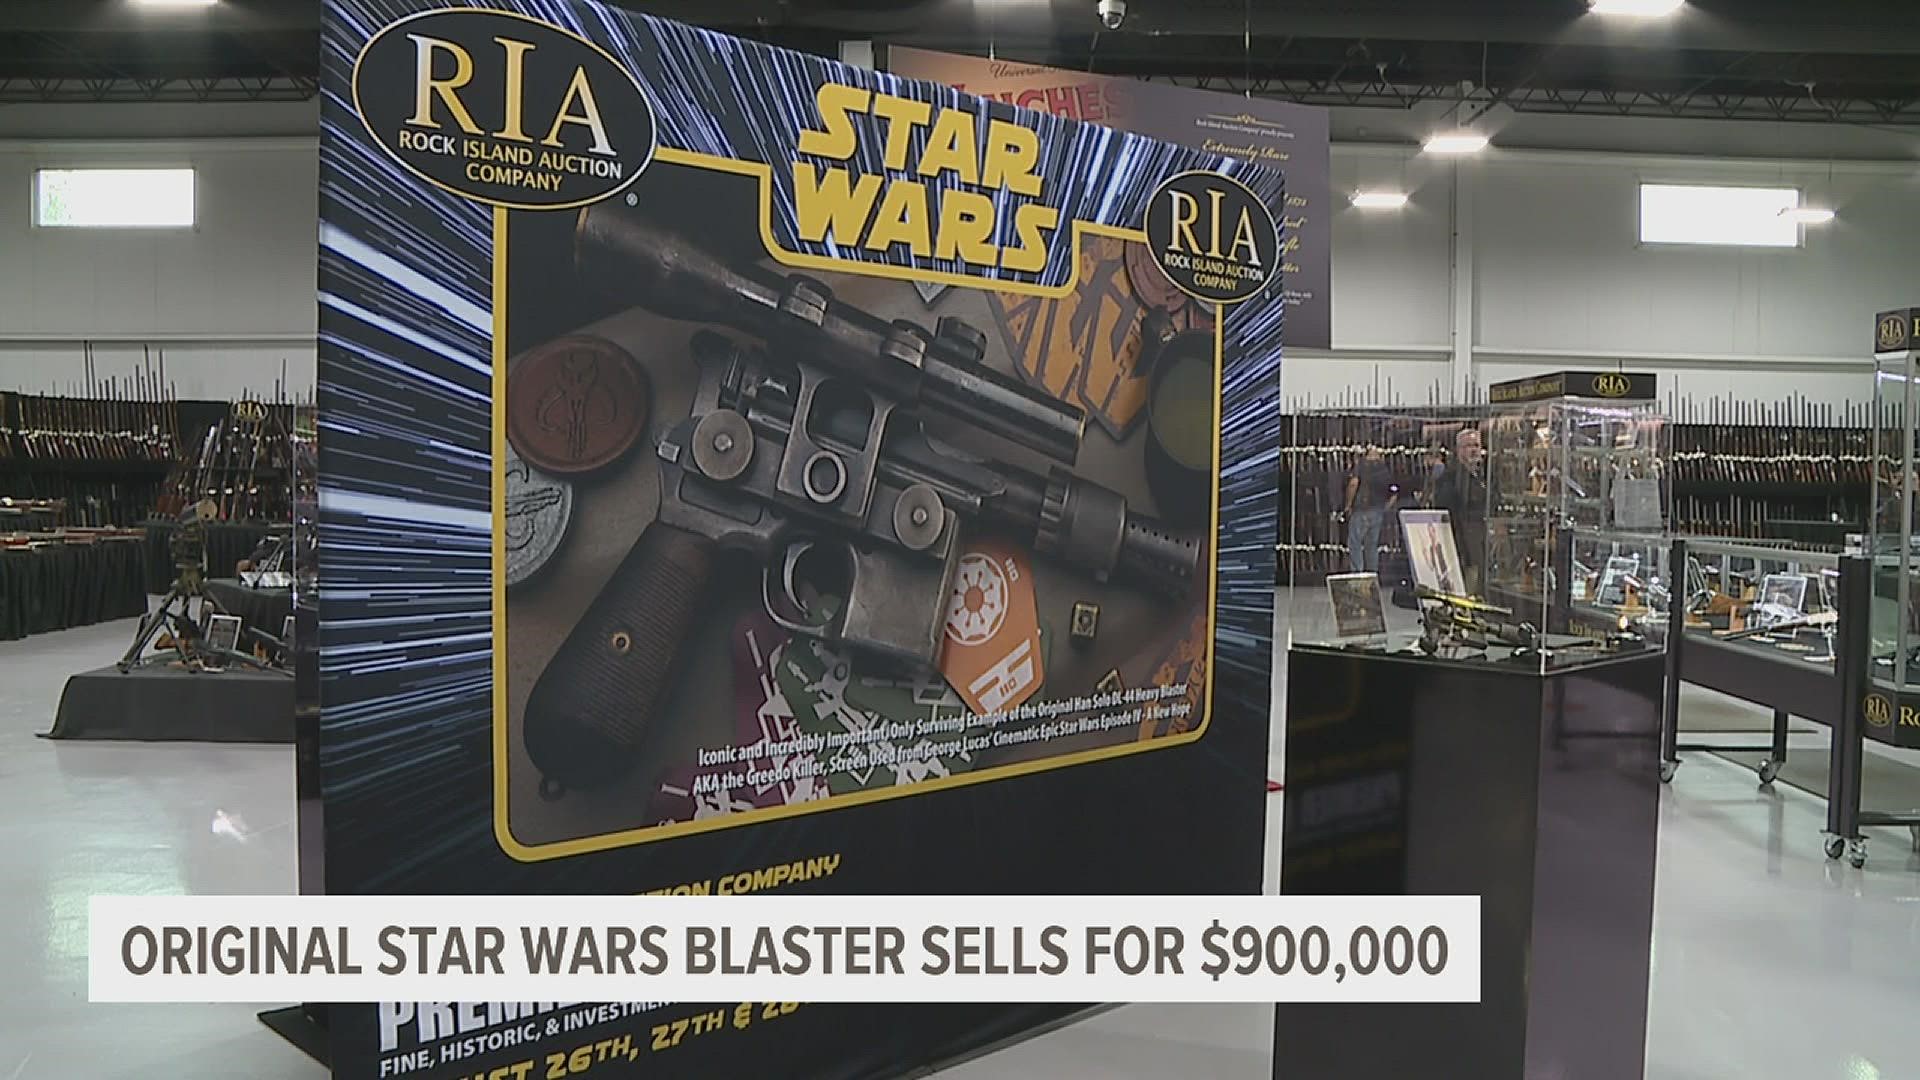 In Thursday's preview event, auction officials said that they expected Han Solo's iconic blaster to sell for at least $500,000.